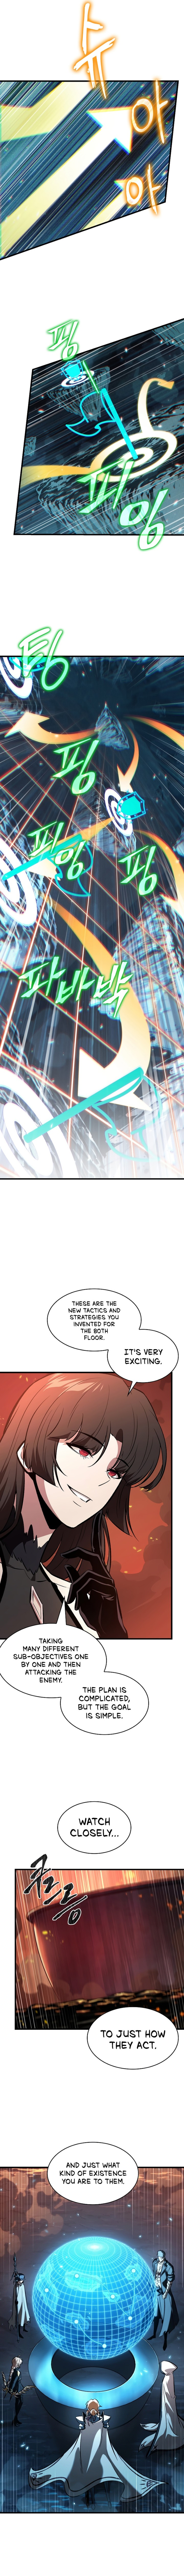 Pick Me Up - Chapter 36 Page 7